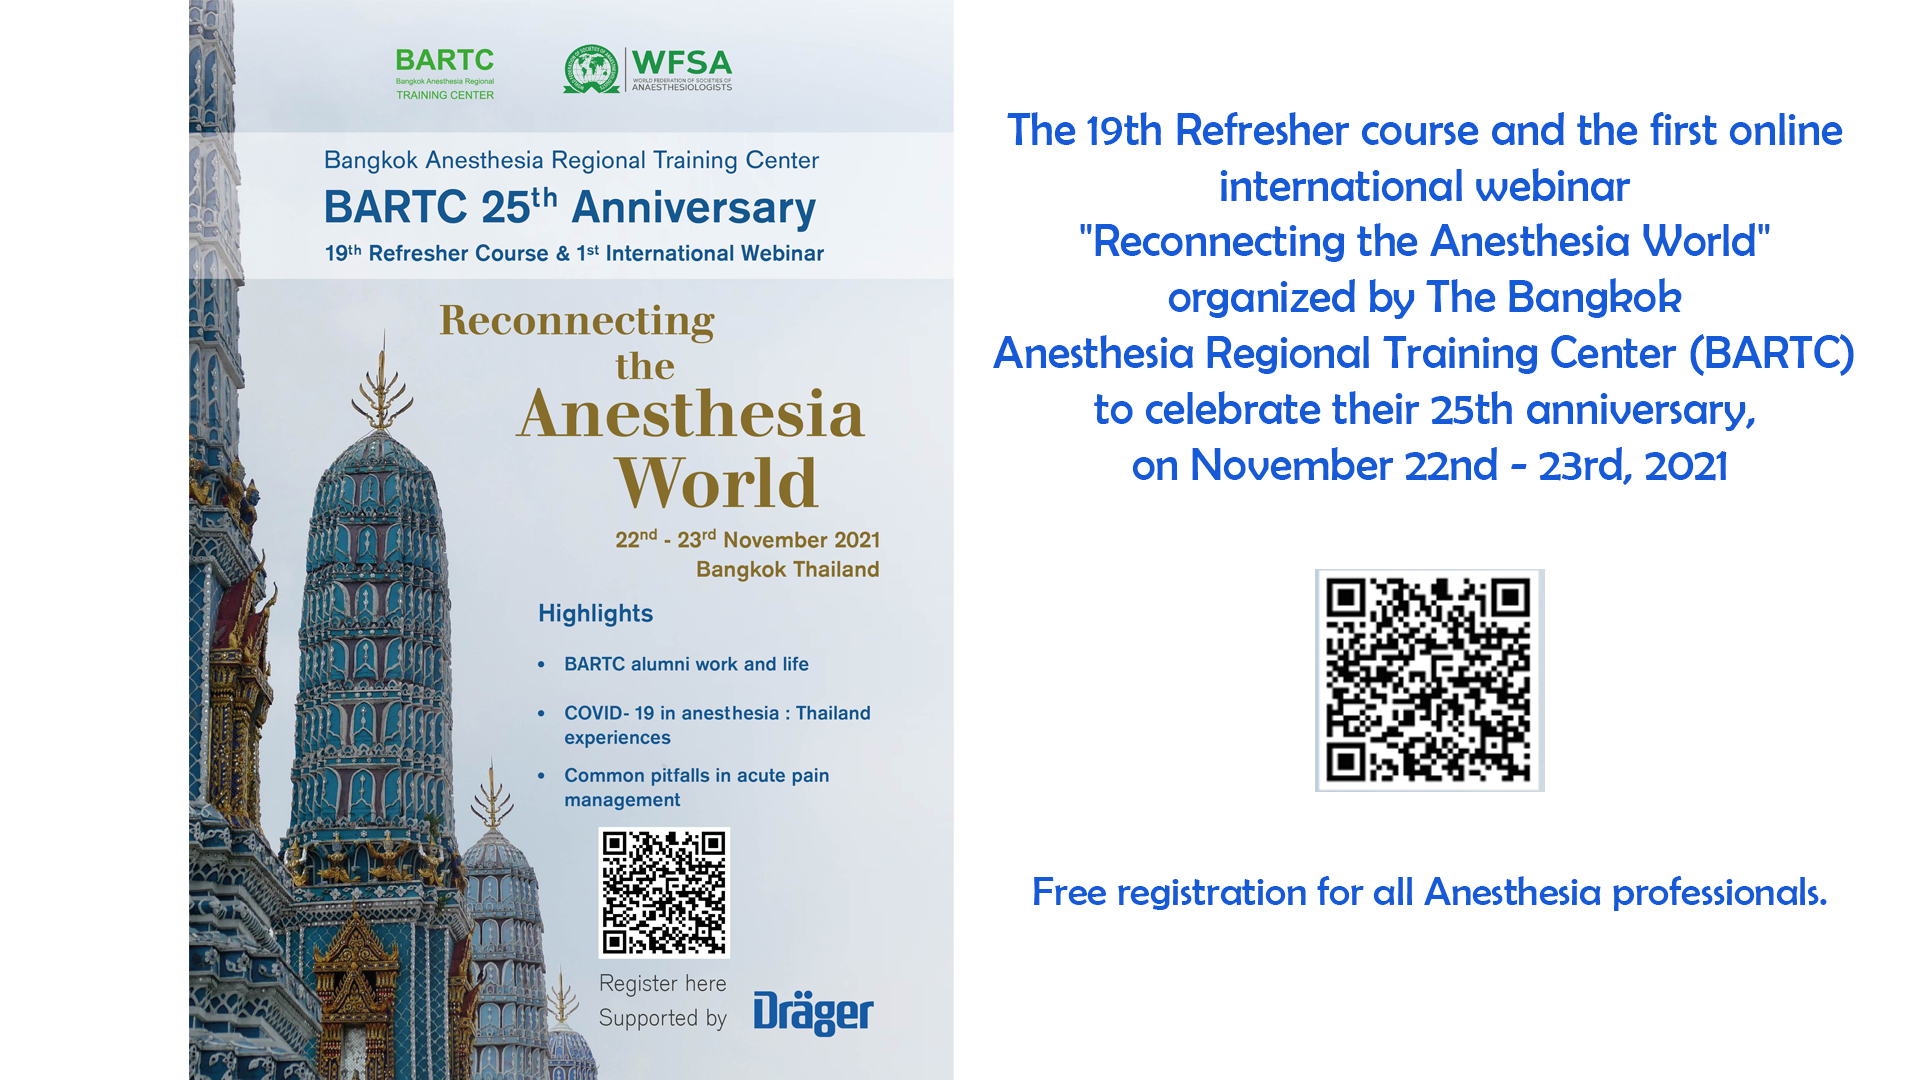 The 19th Refresher course and the first online international webinar “Reconnecting the Anesthesia World” organized by The Bangkok Anesthesia Regional Training Center (BARTC) to celebrate their 25th anniversary, on November 22nd – 23rd, 2021